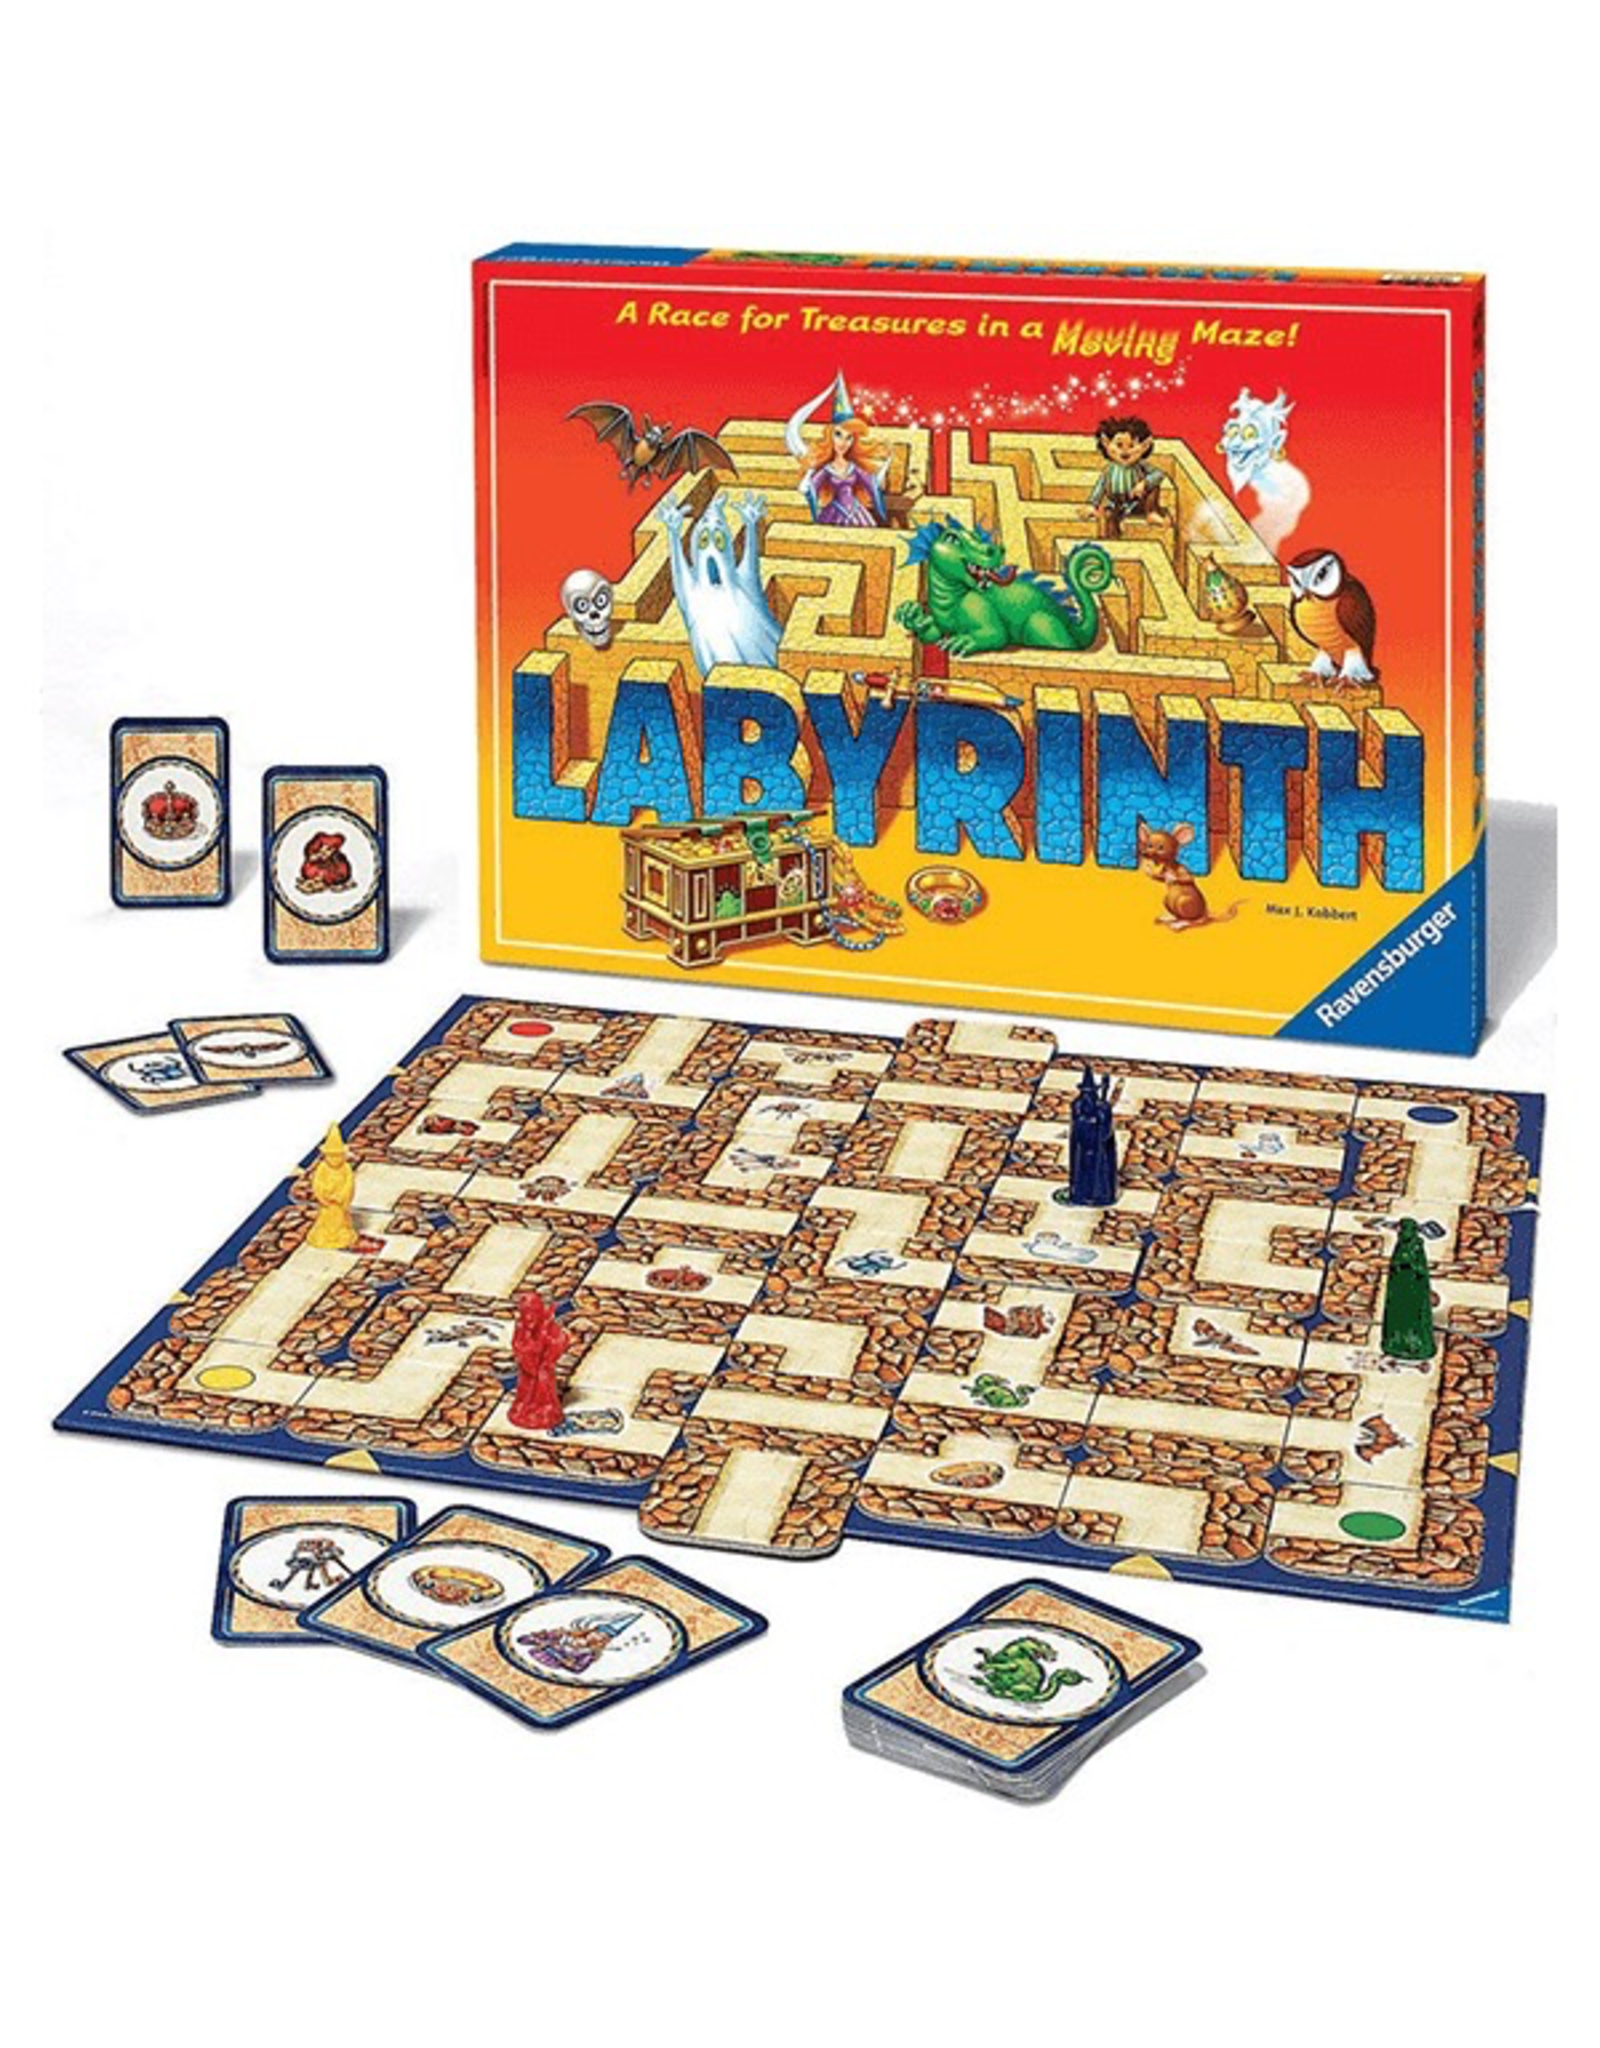 Harry Potter maze-shifting fun - The Board Game Family